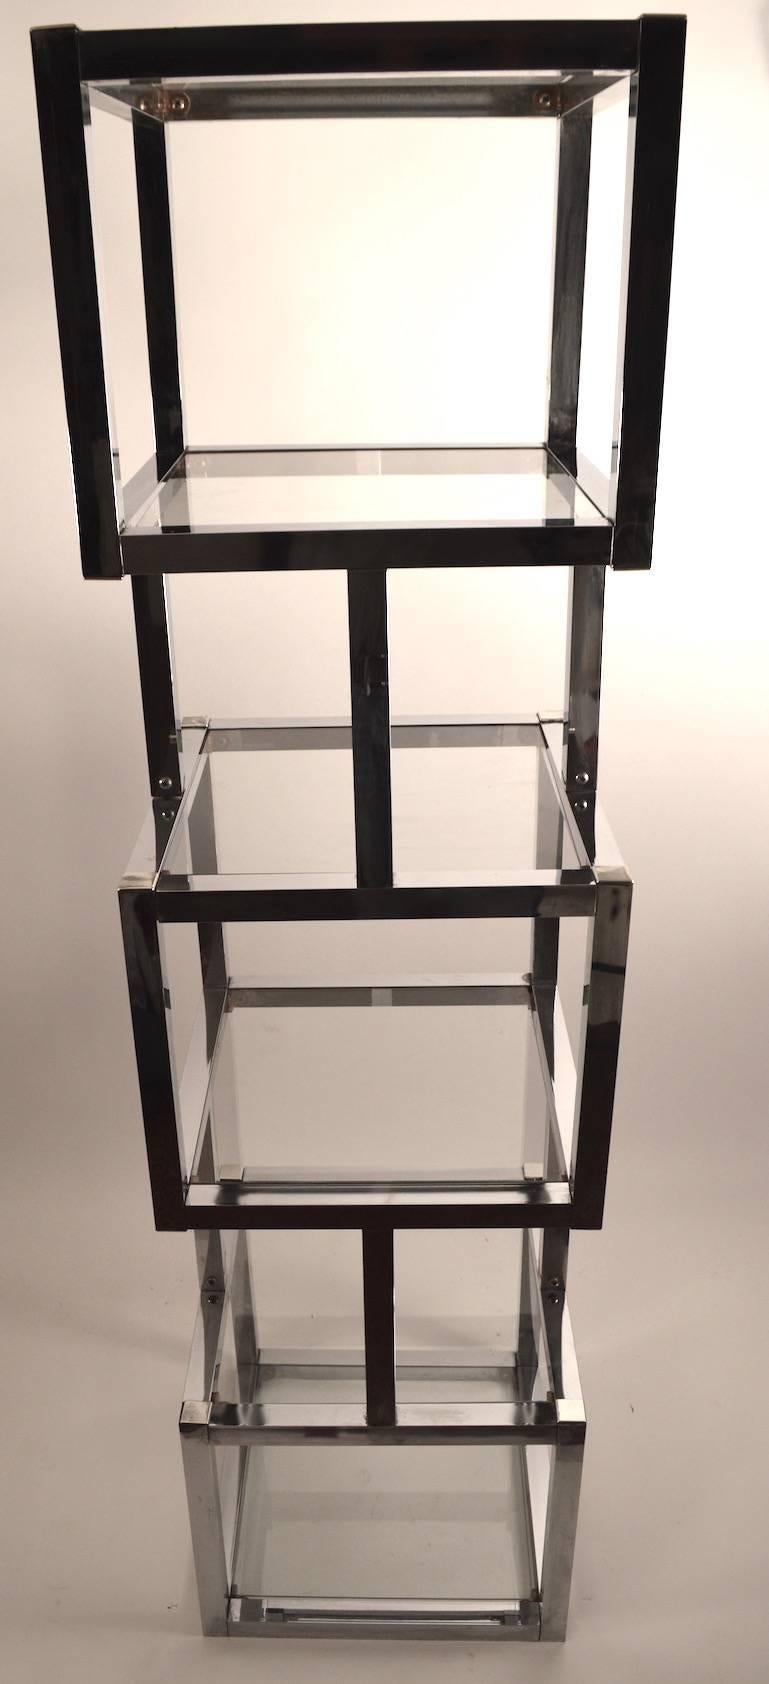 Stacked chrome cubes with glass shelves - each 